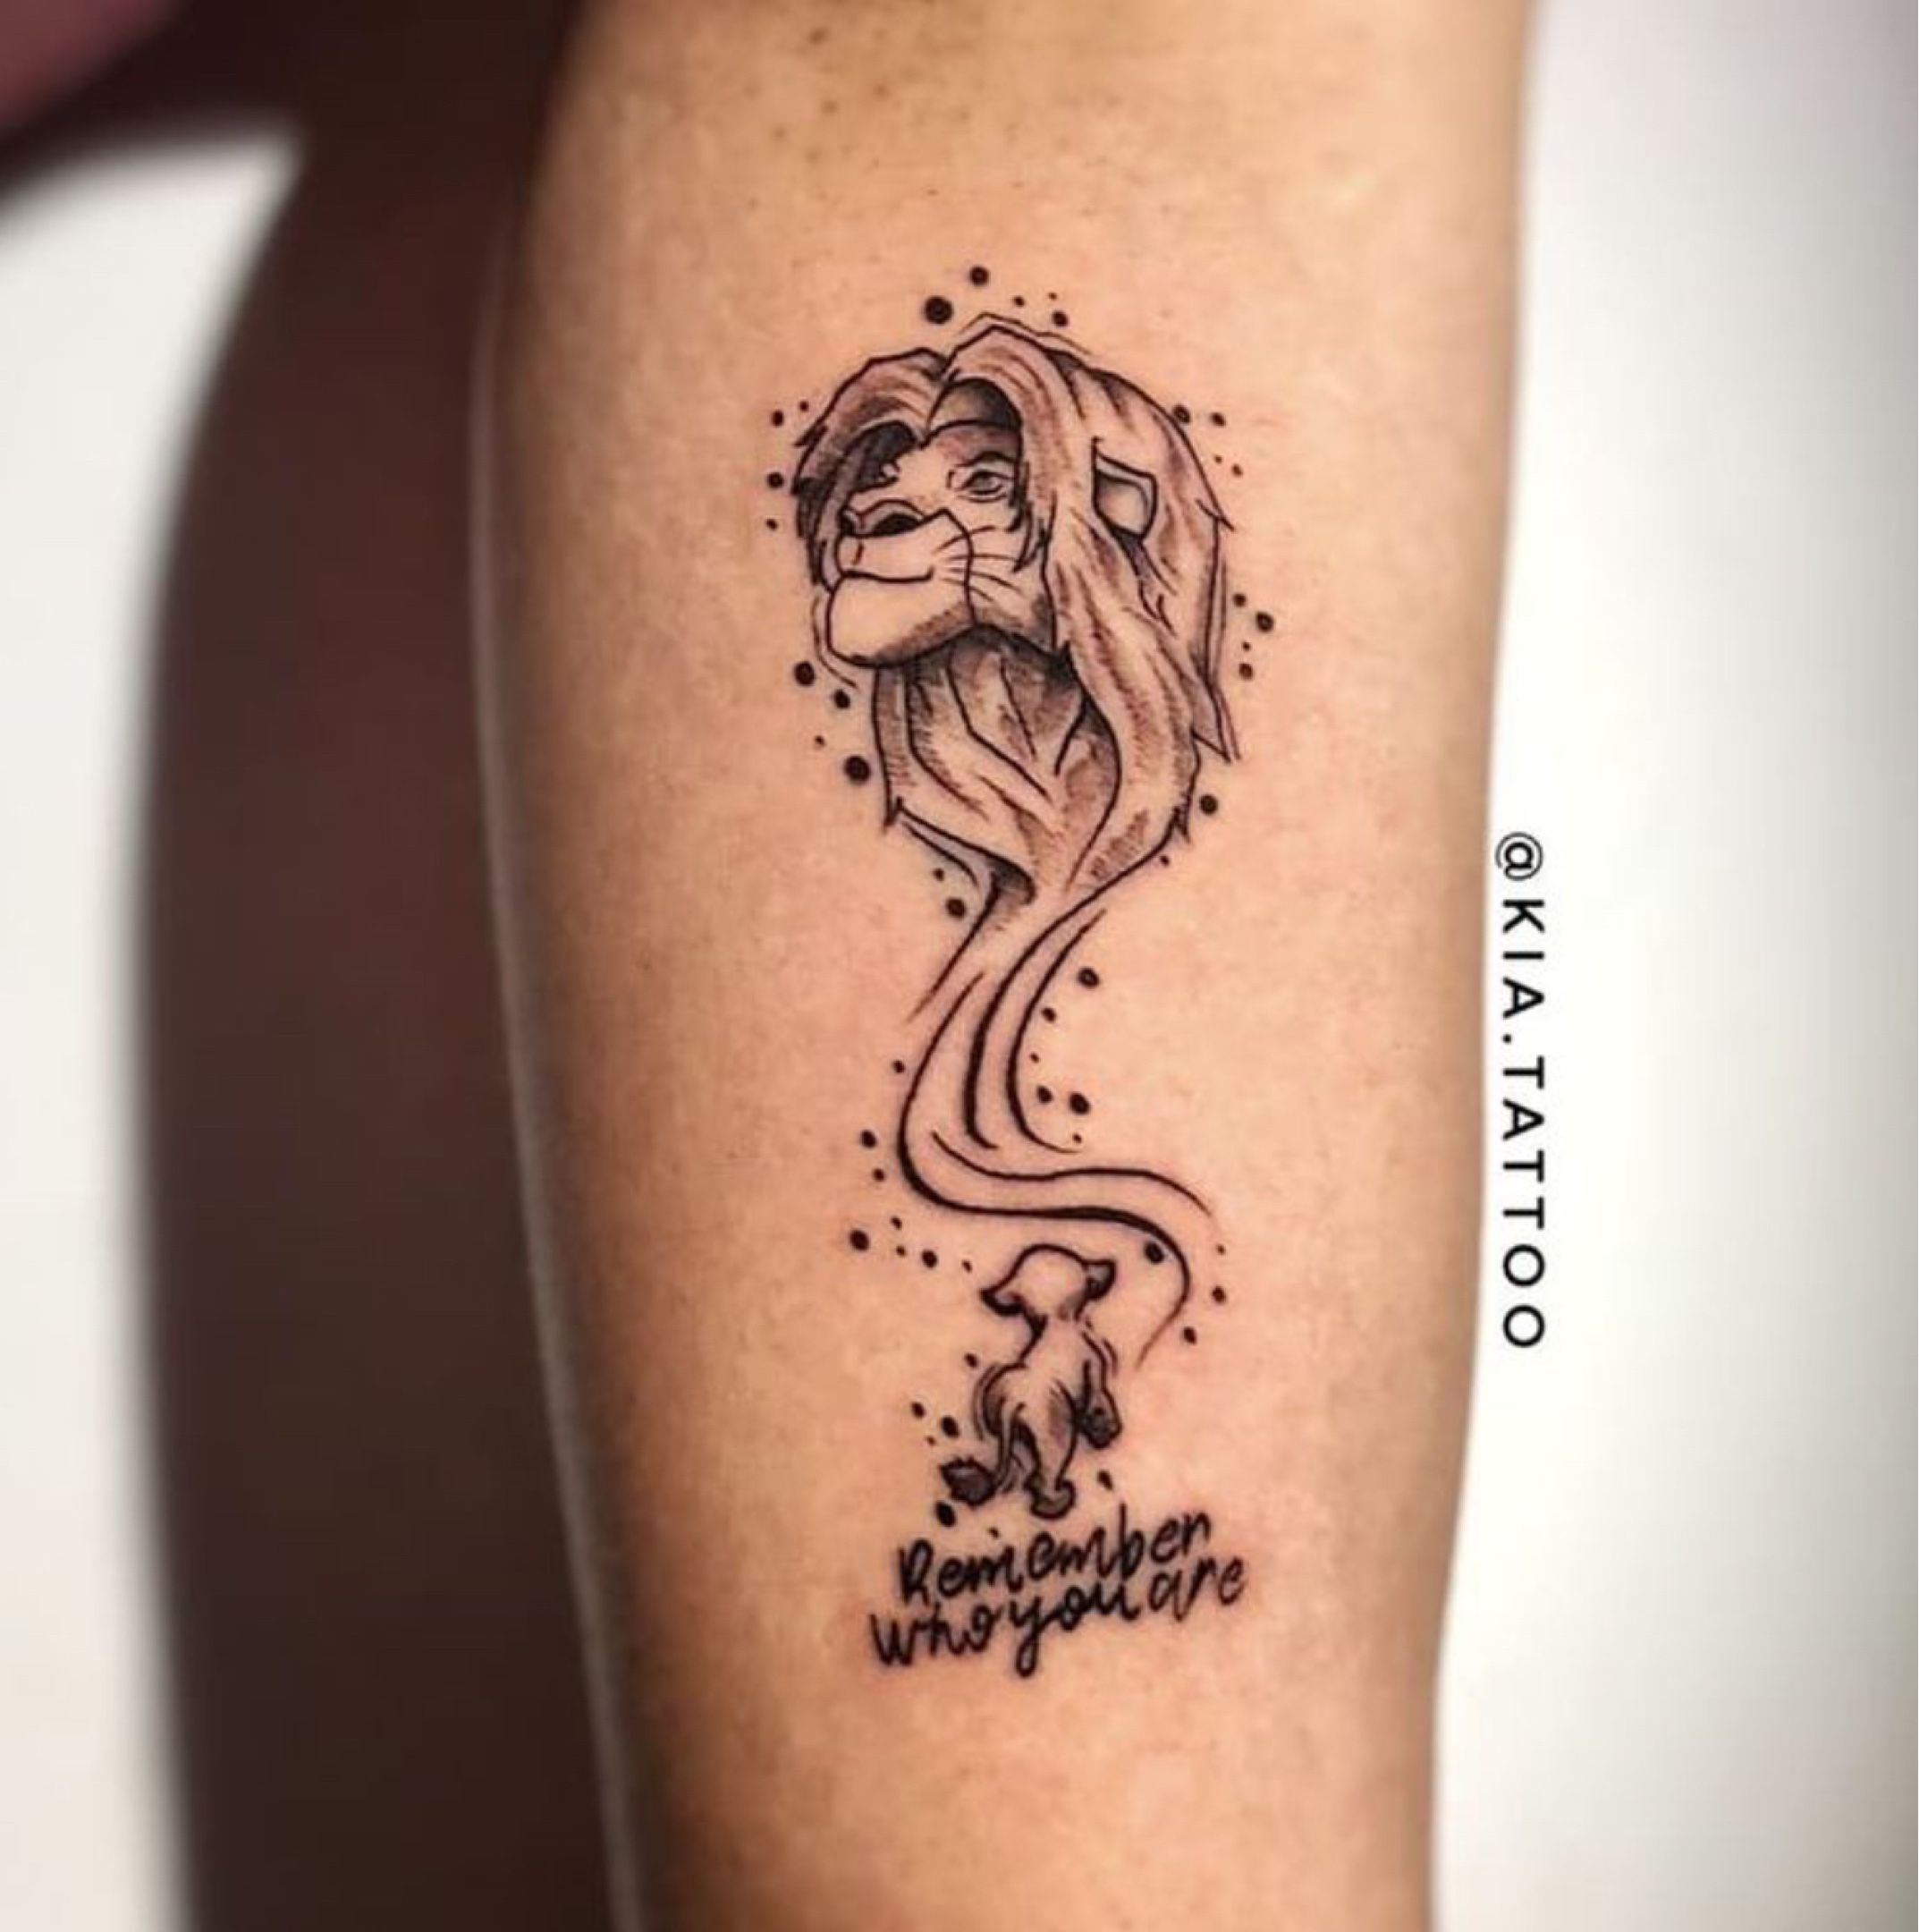 Mufasa tattoo remember who you are